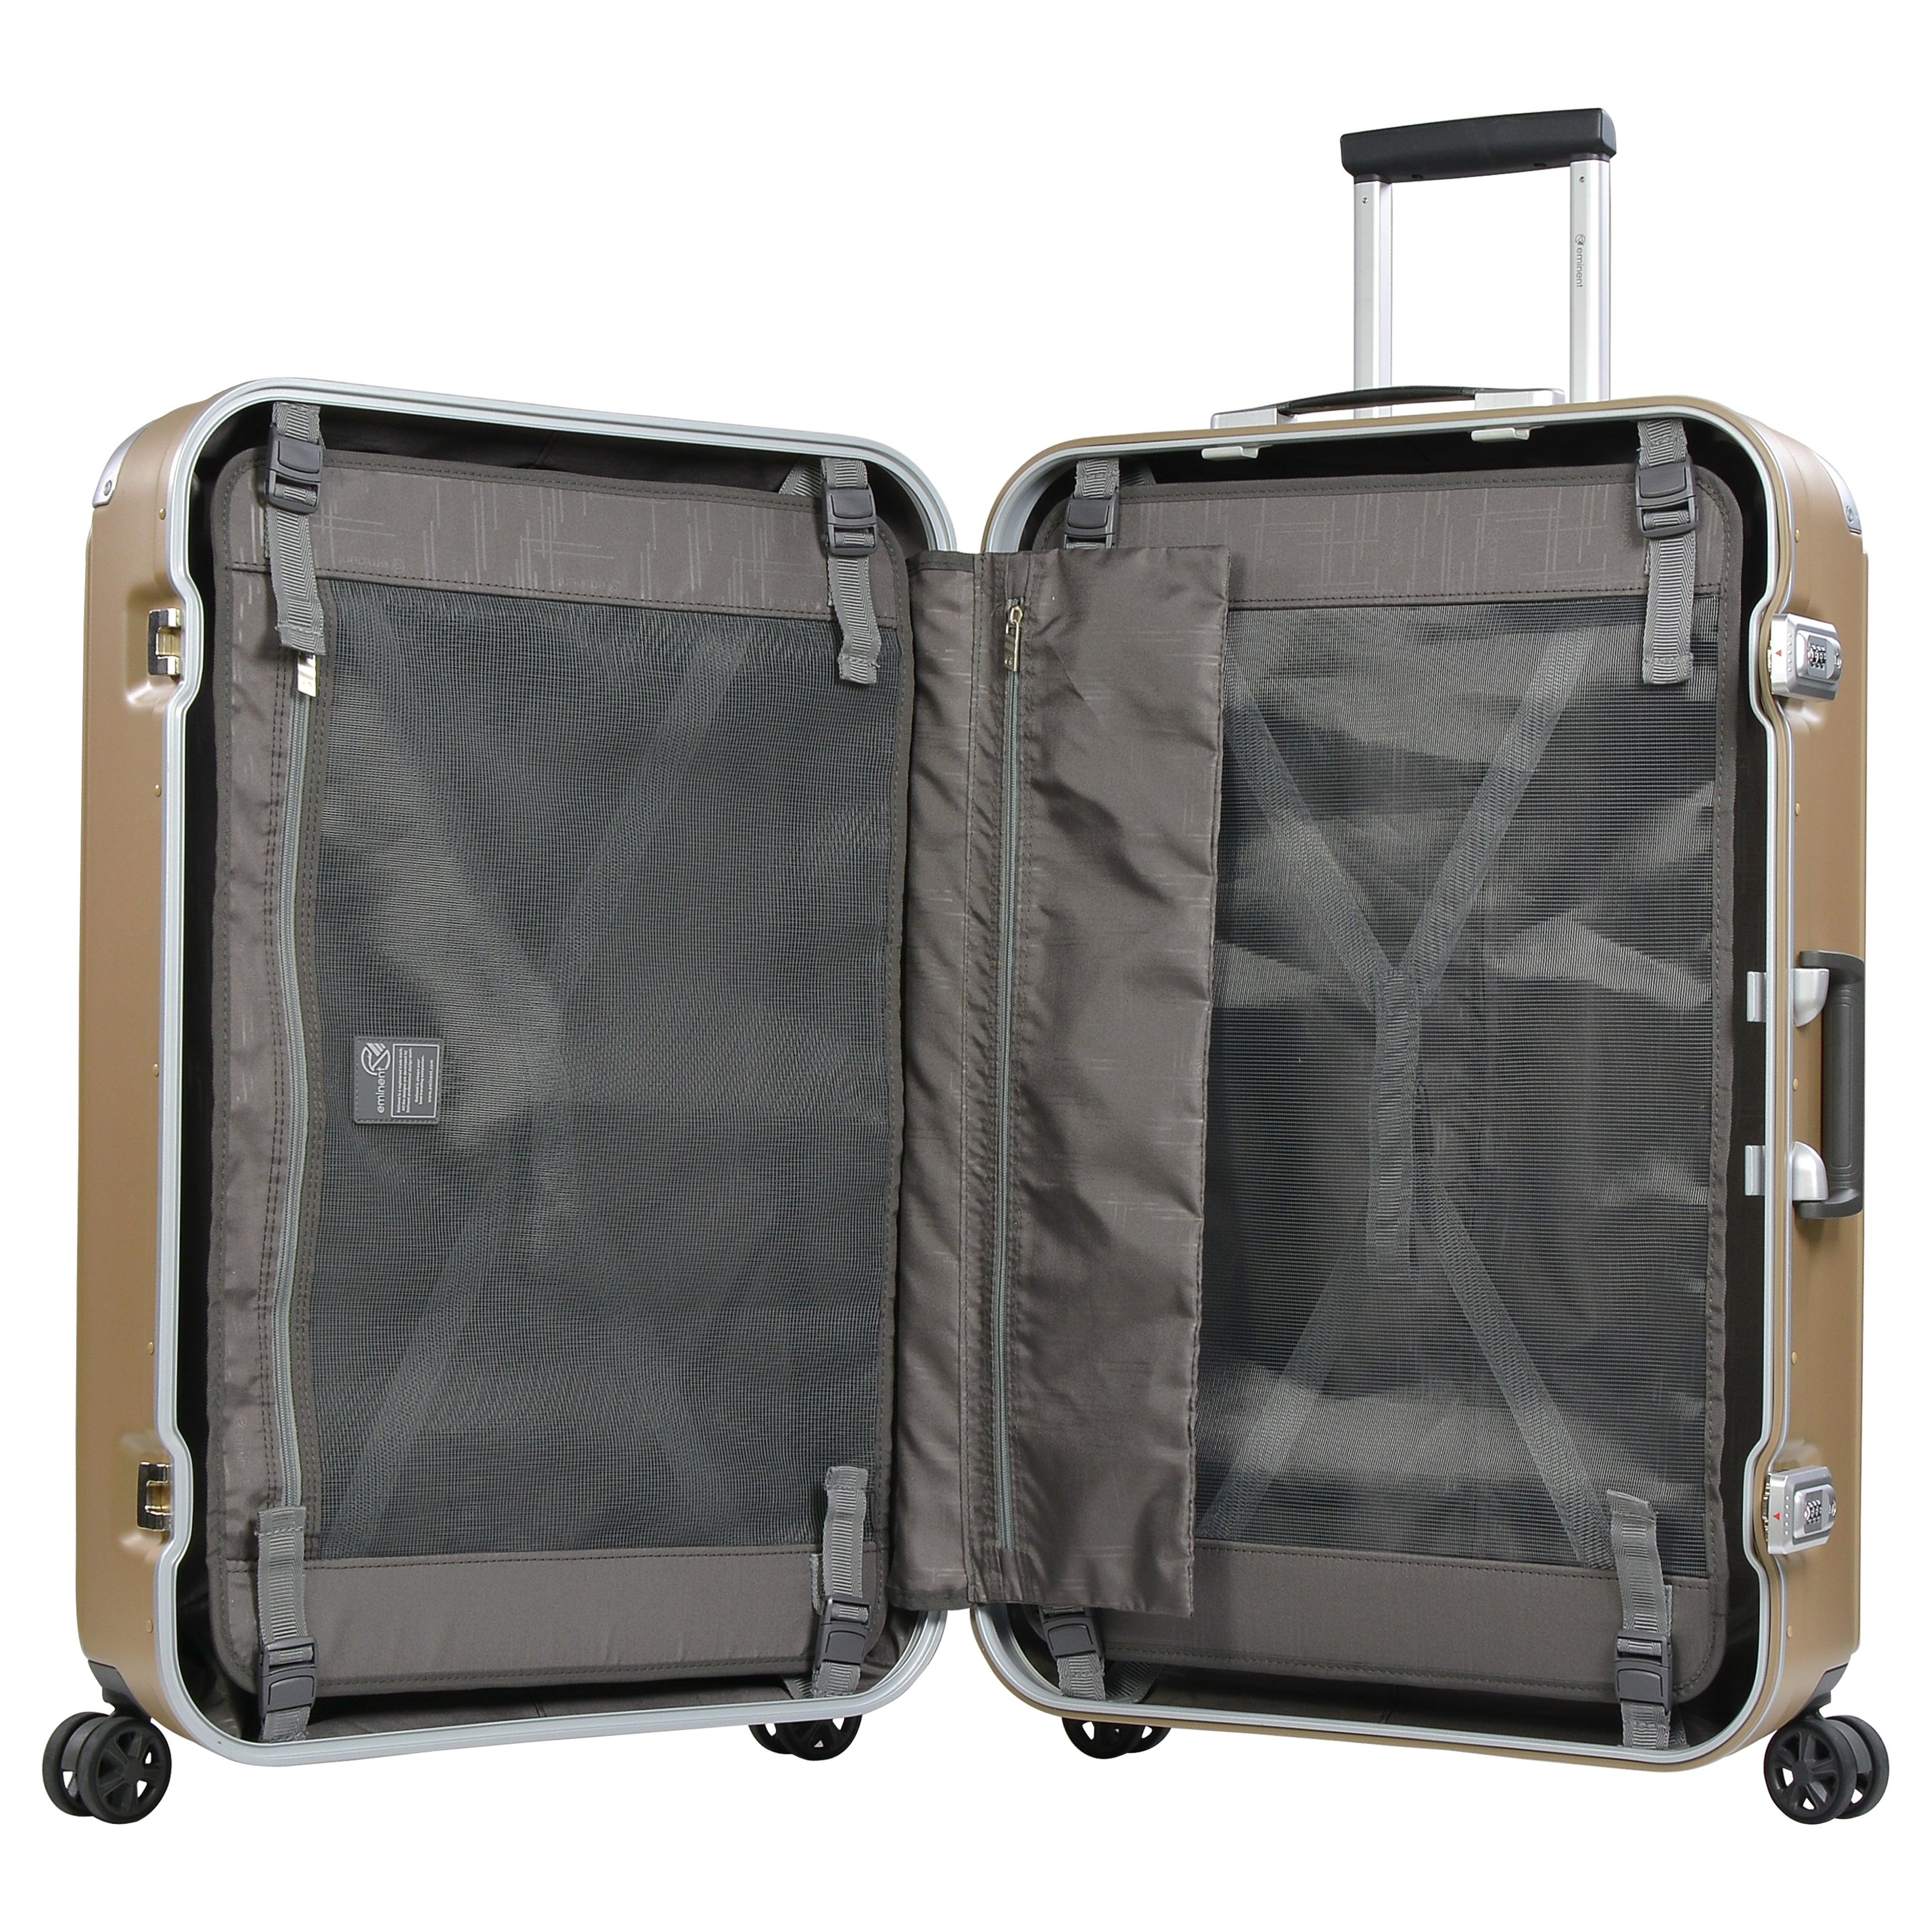 Eminent branded 28" PC Frame checked size  Light Weight Spinner Trolley bag (E9R5-28) - buyluggageonline